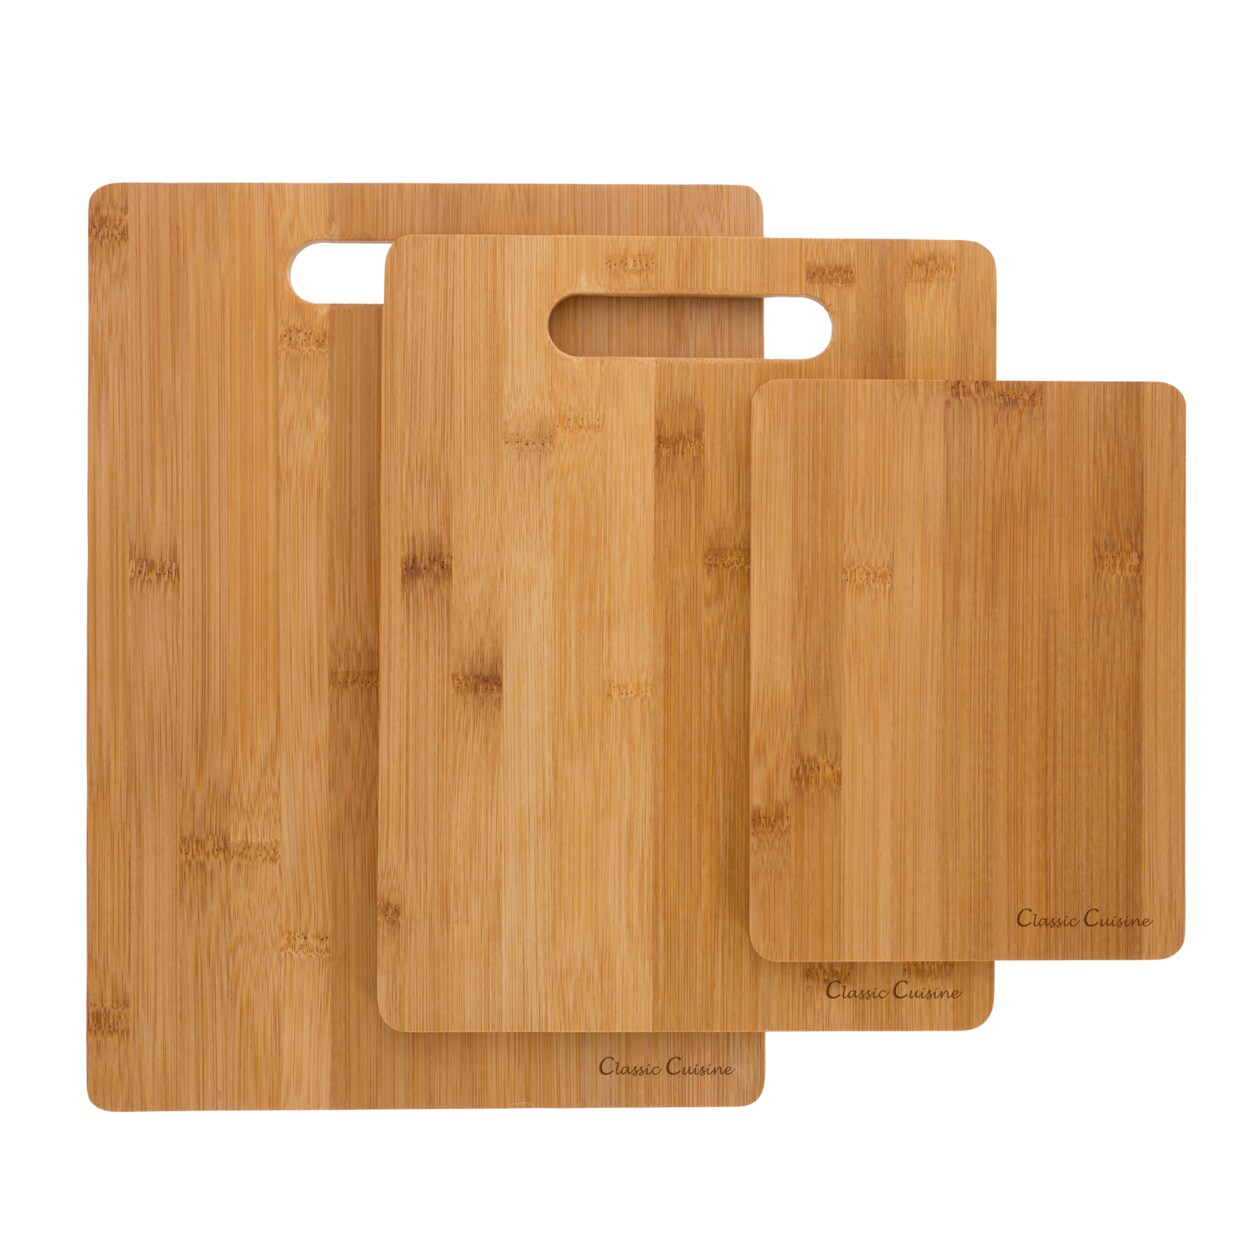 Classic Cuisine Set of 3 Bamboo Cutting Boards by